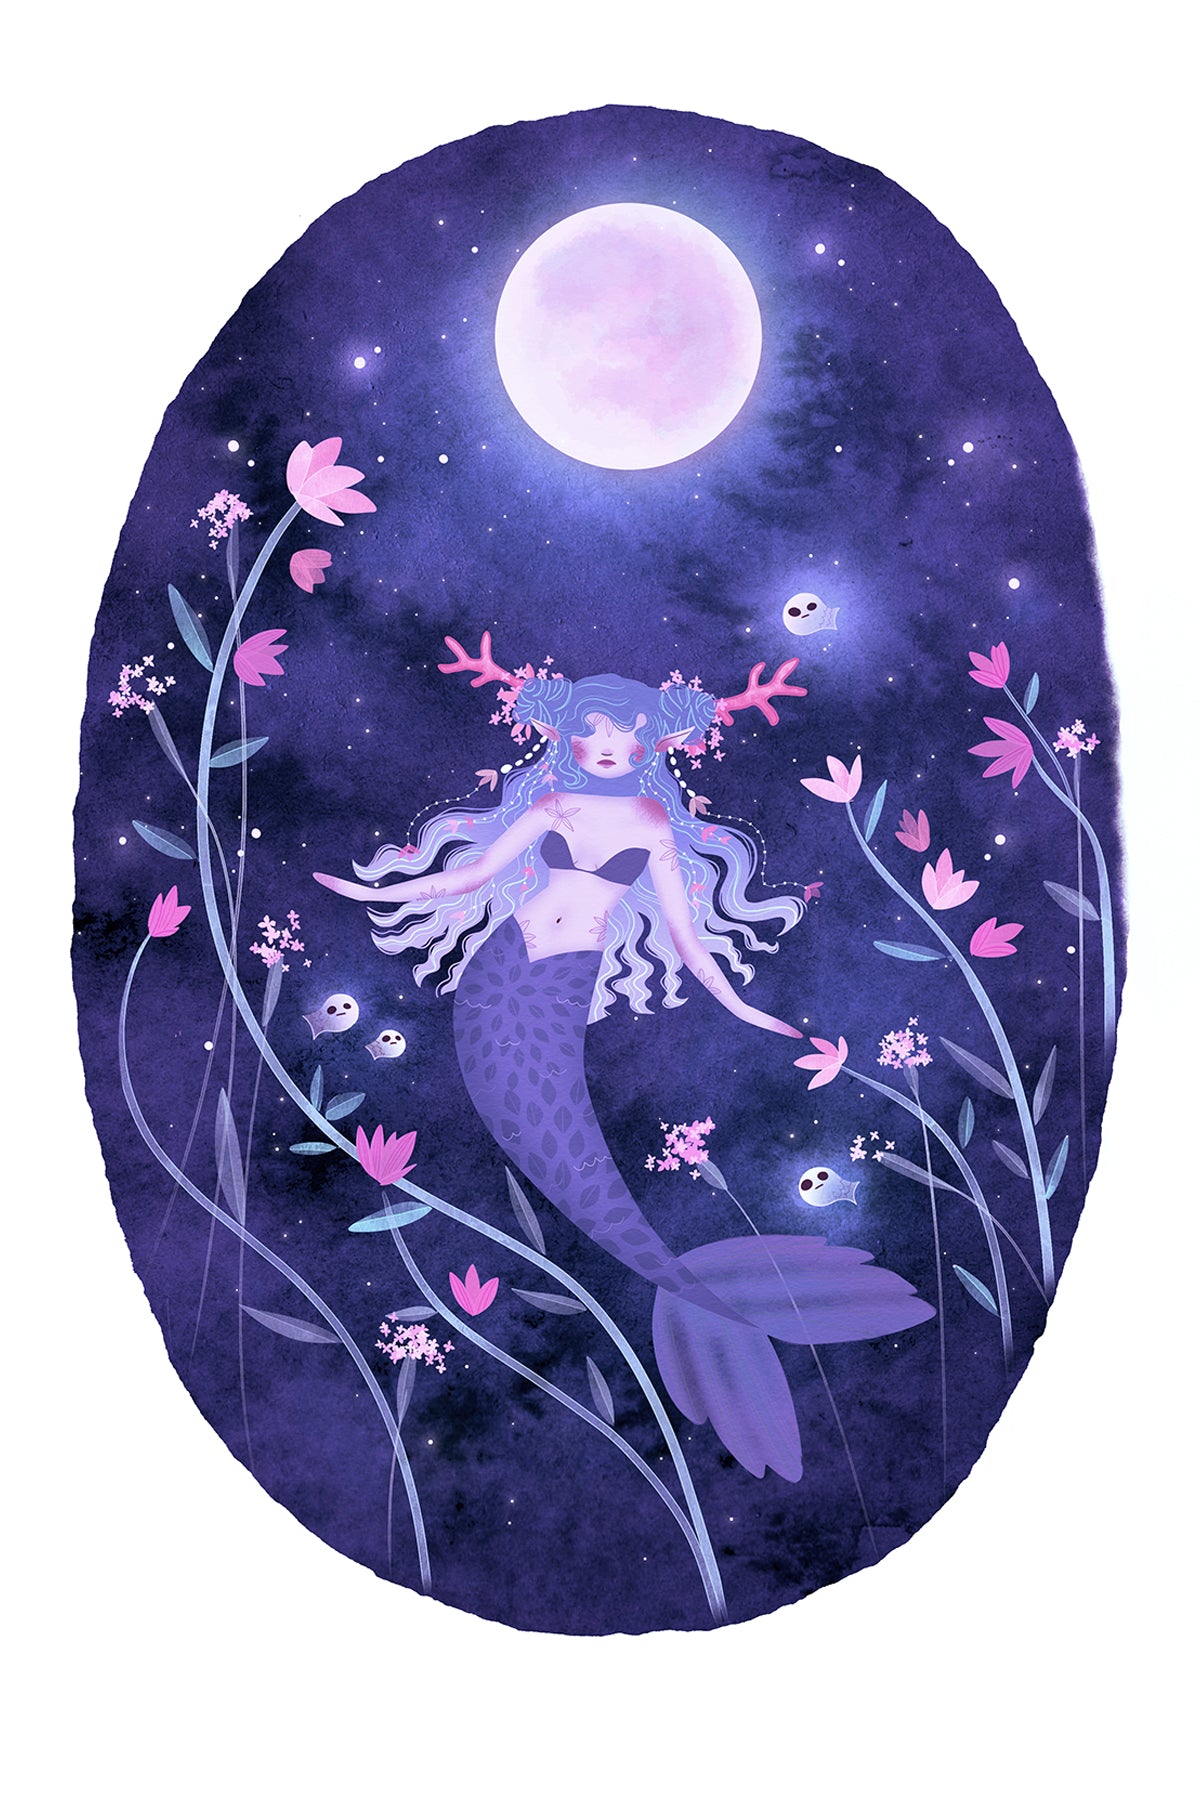 CLEARANCE "Spring Mermaid in Purple" LIMITED EDITION Wall Art Print